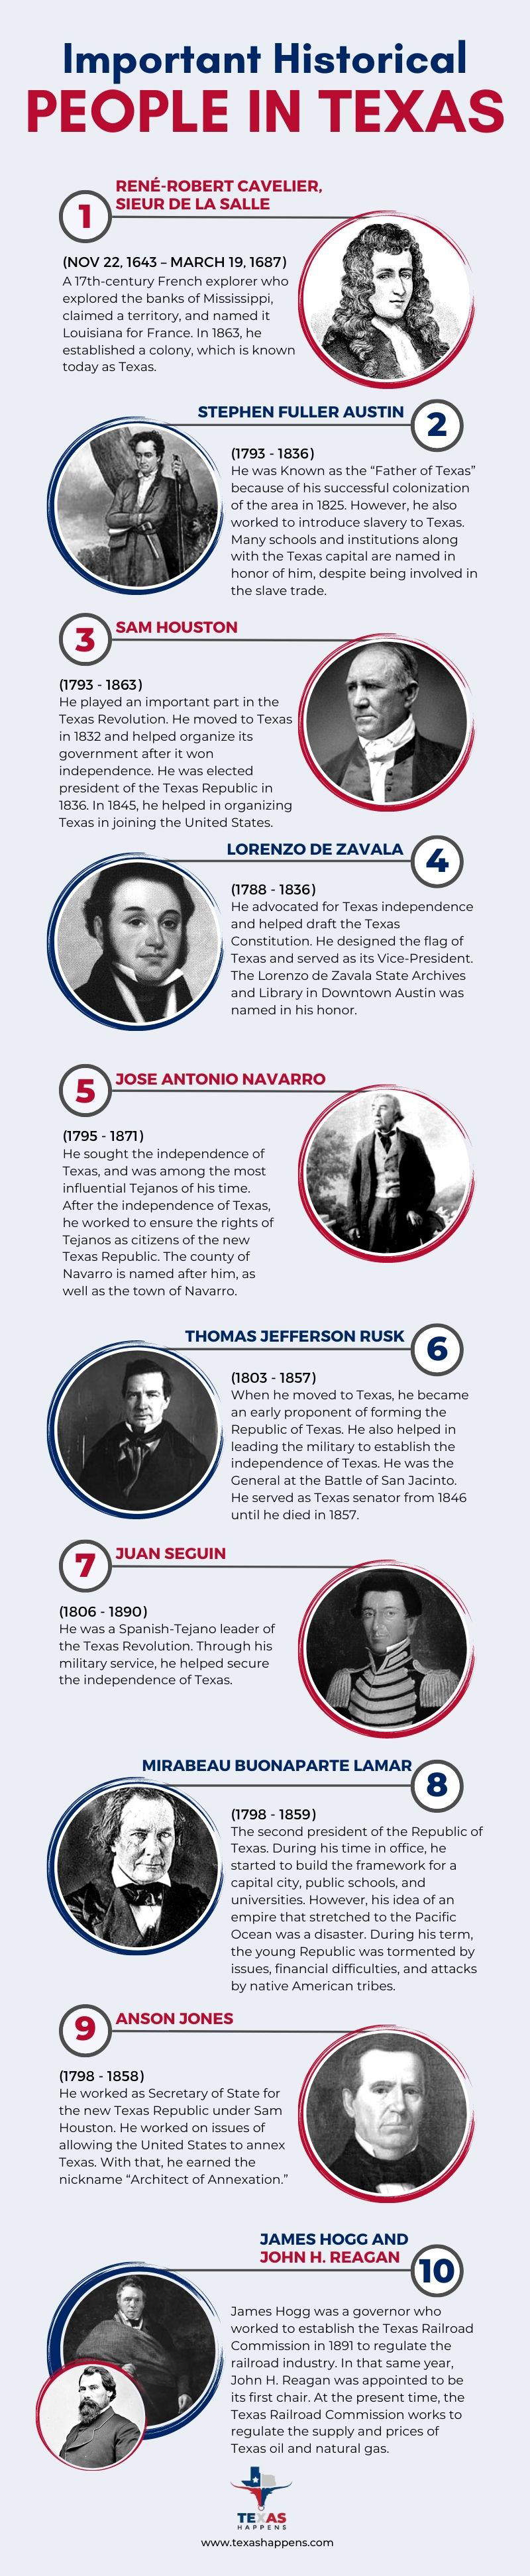 Important Historical People in Texas